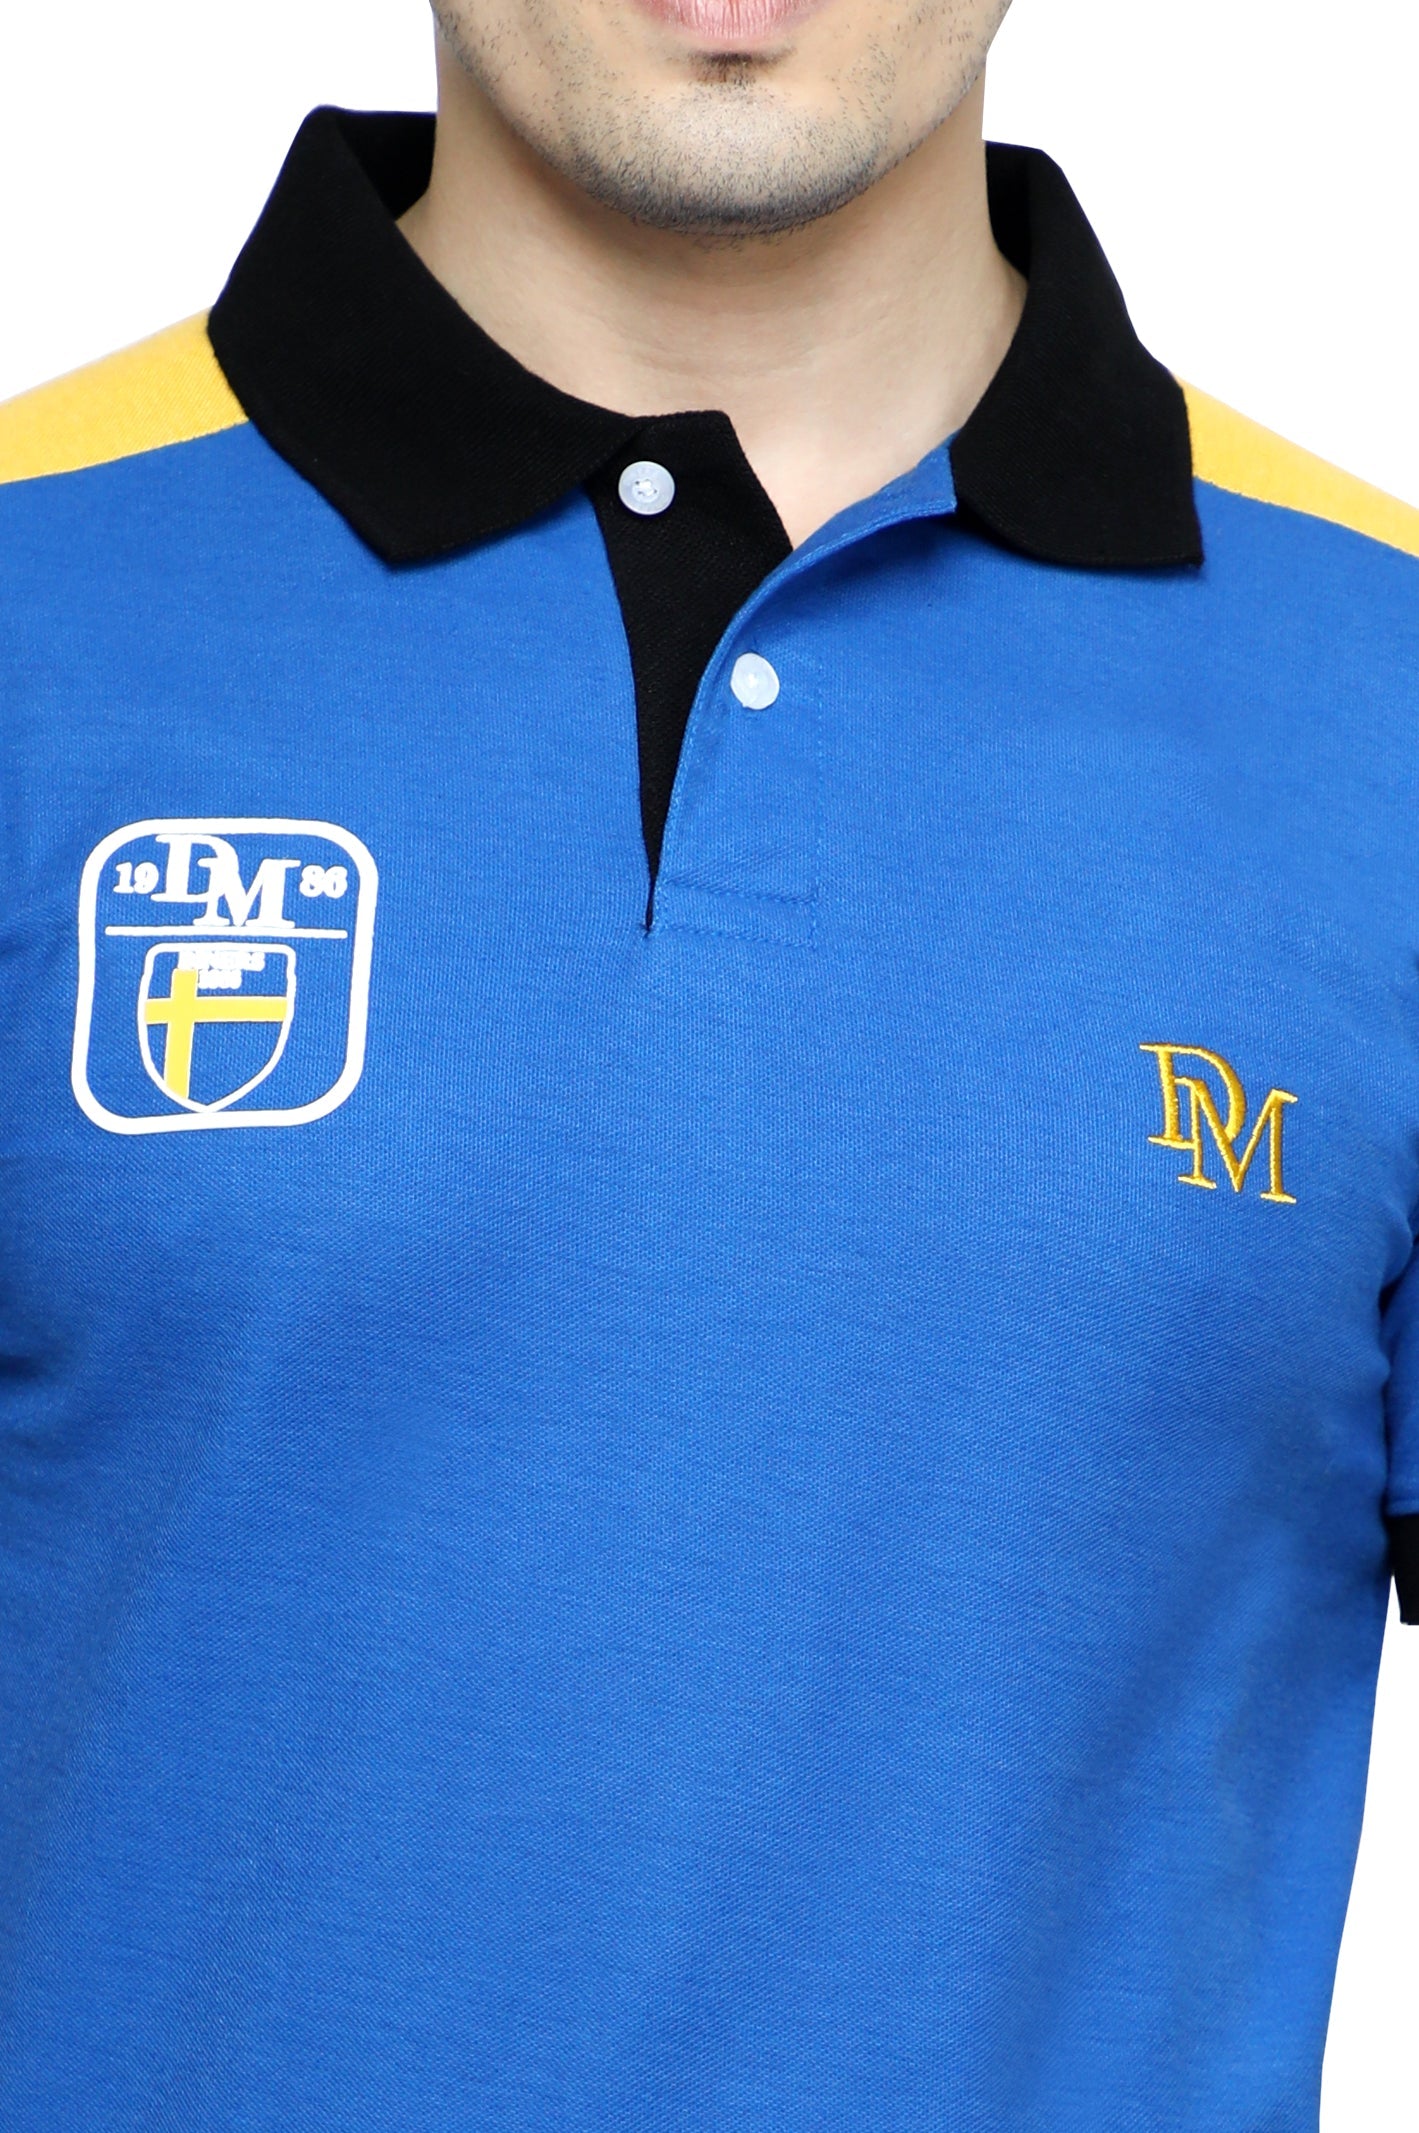 Diner's Men's Polo T-Shirt SKU: NA716-MUSTERD - Diners